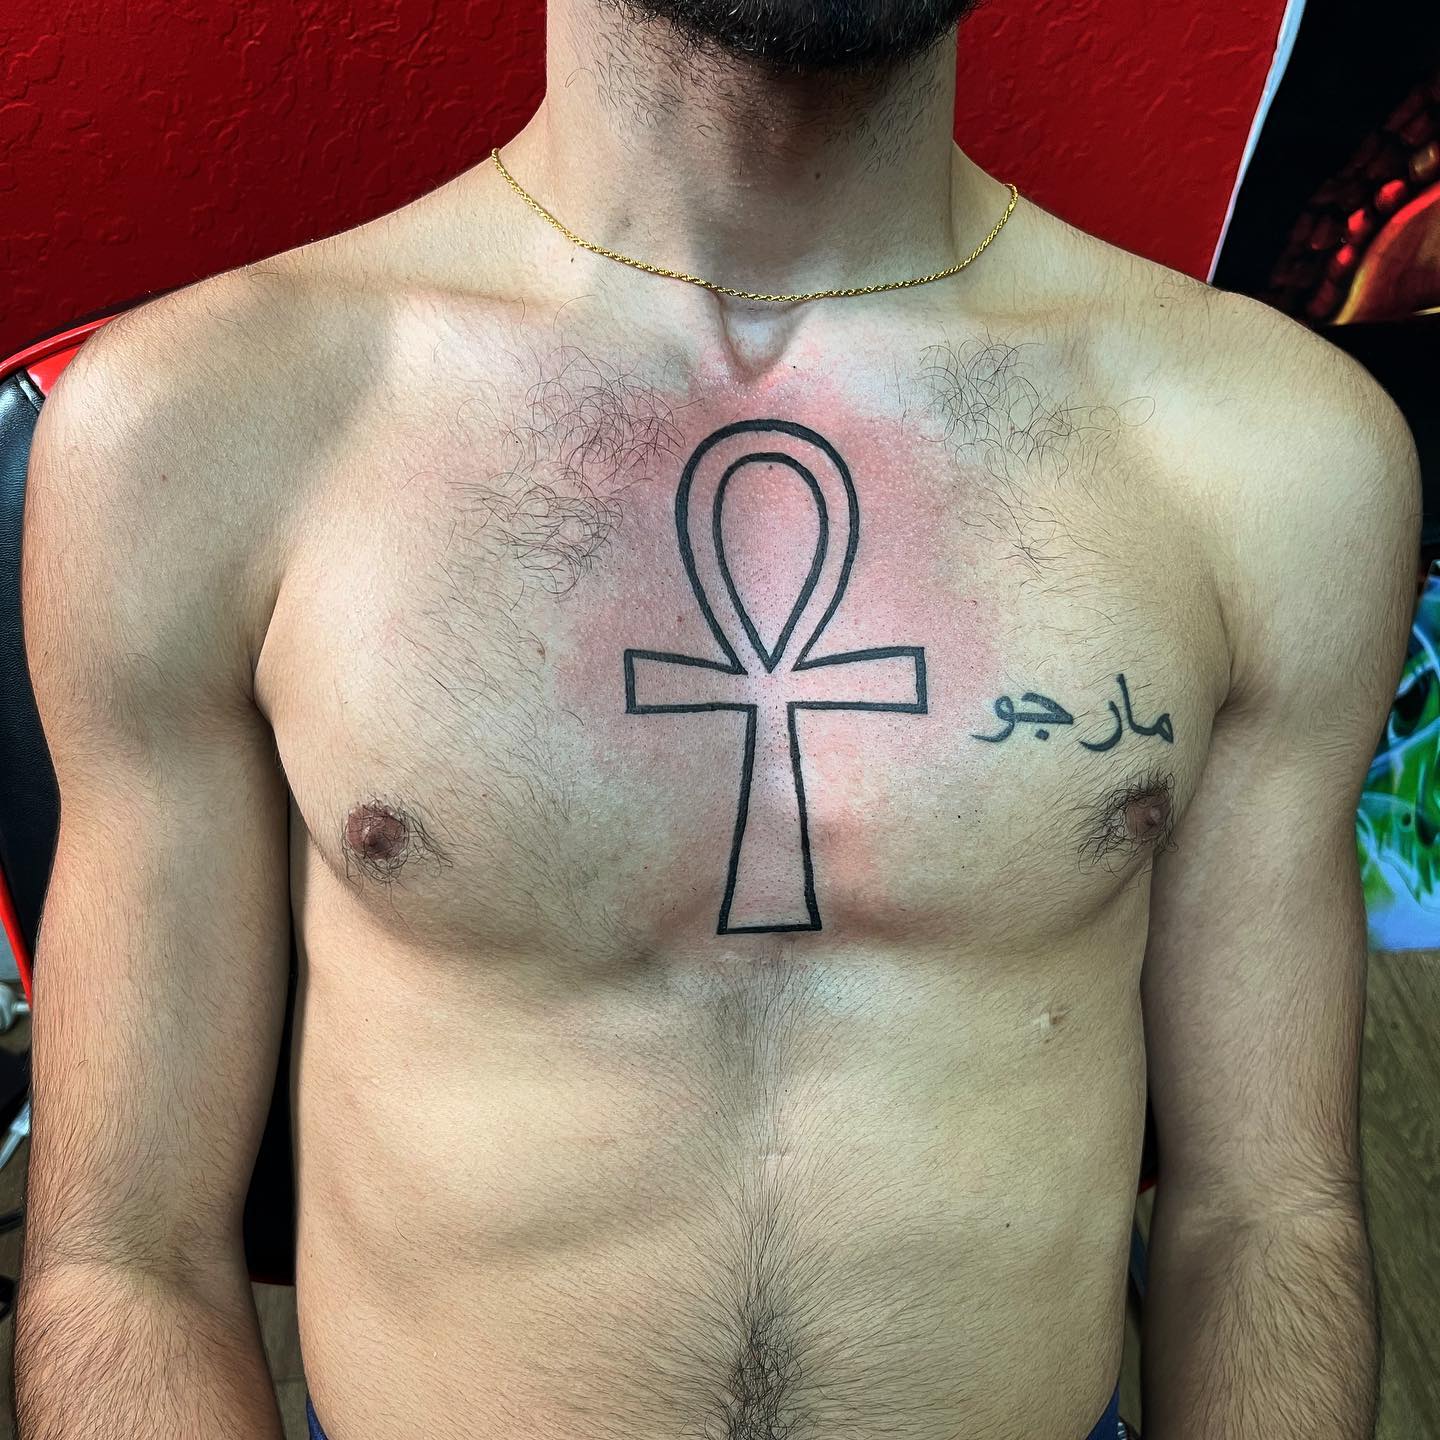 Tattoo Artist kind of messed up the ankh symbol Is it very noticable If  so can it be somehow fixed My only idea would be making a sleeve out of  it later